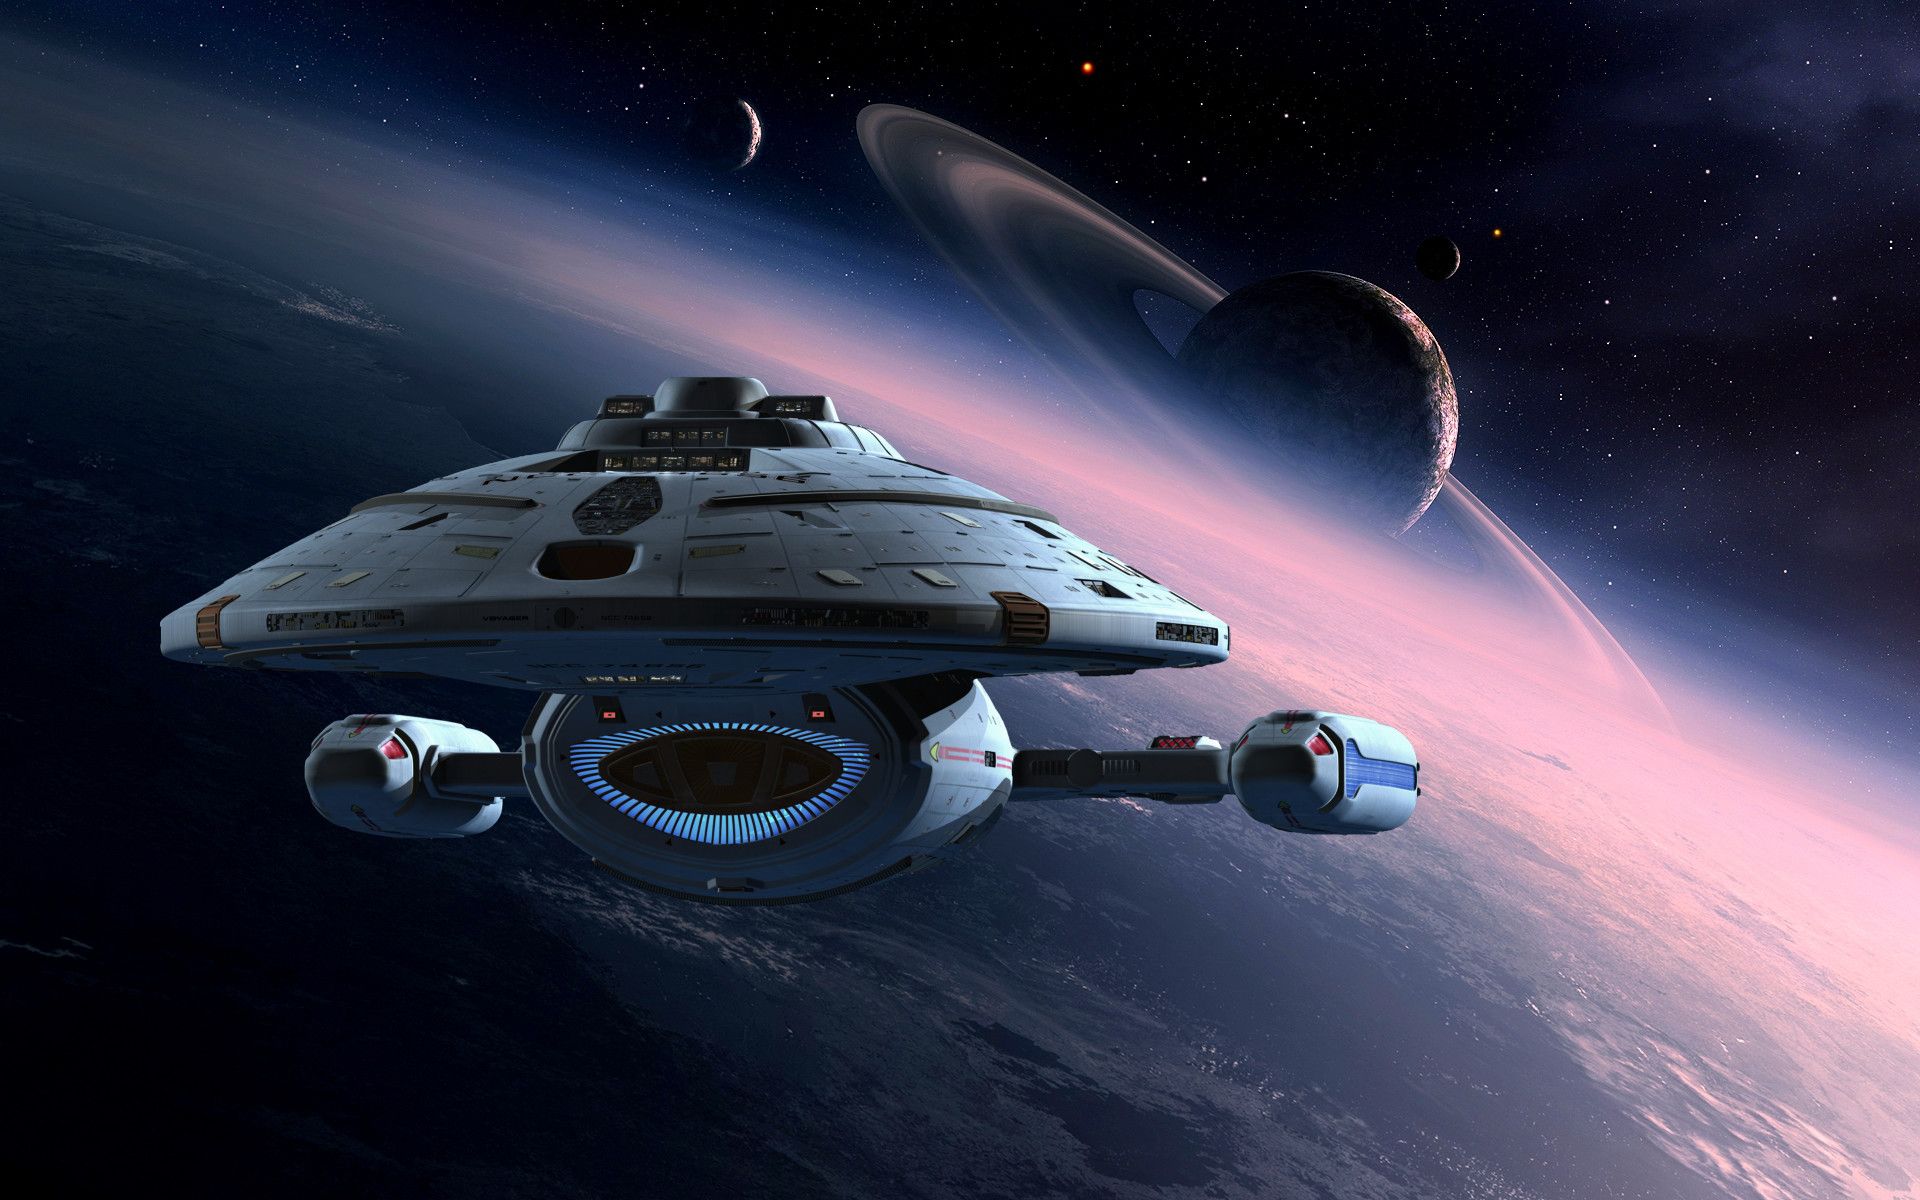 A ship in space with a planet in the background - Star Trek